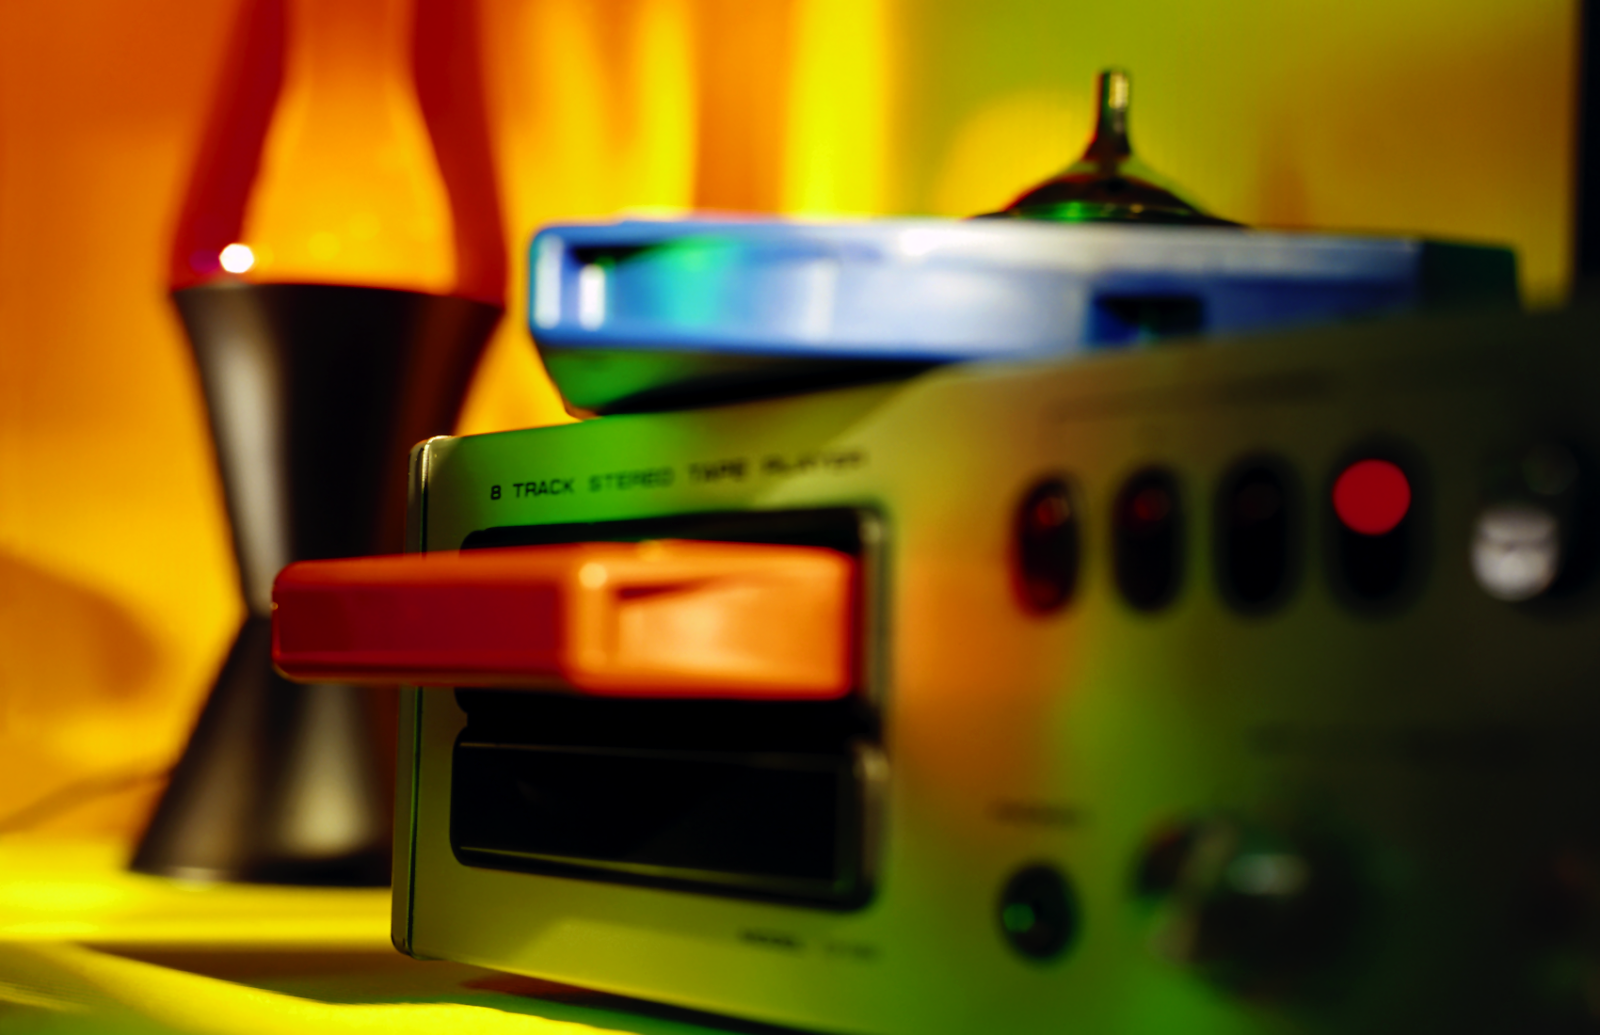 Lava Lamp And Eight Track Wallpaper - 8 Track - HD Wallpaper 